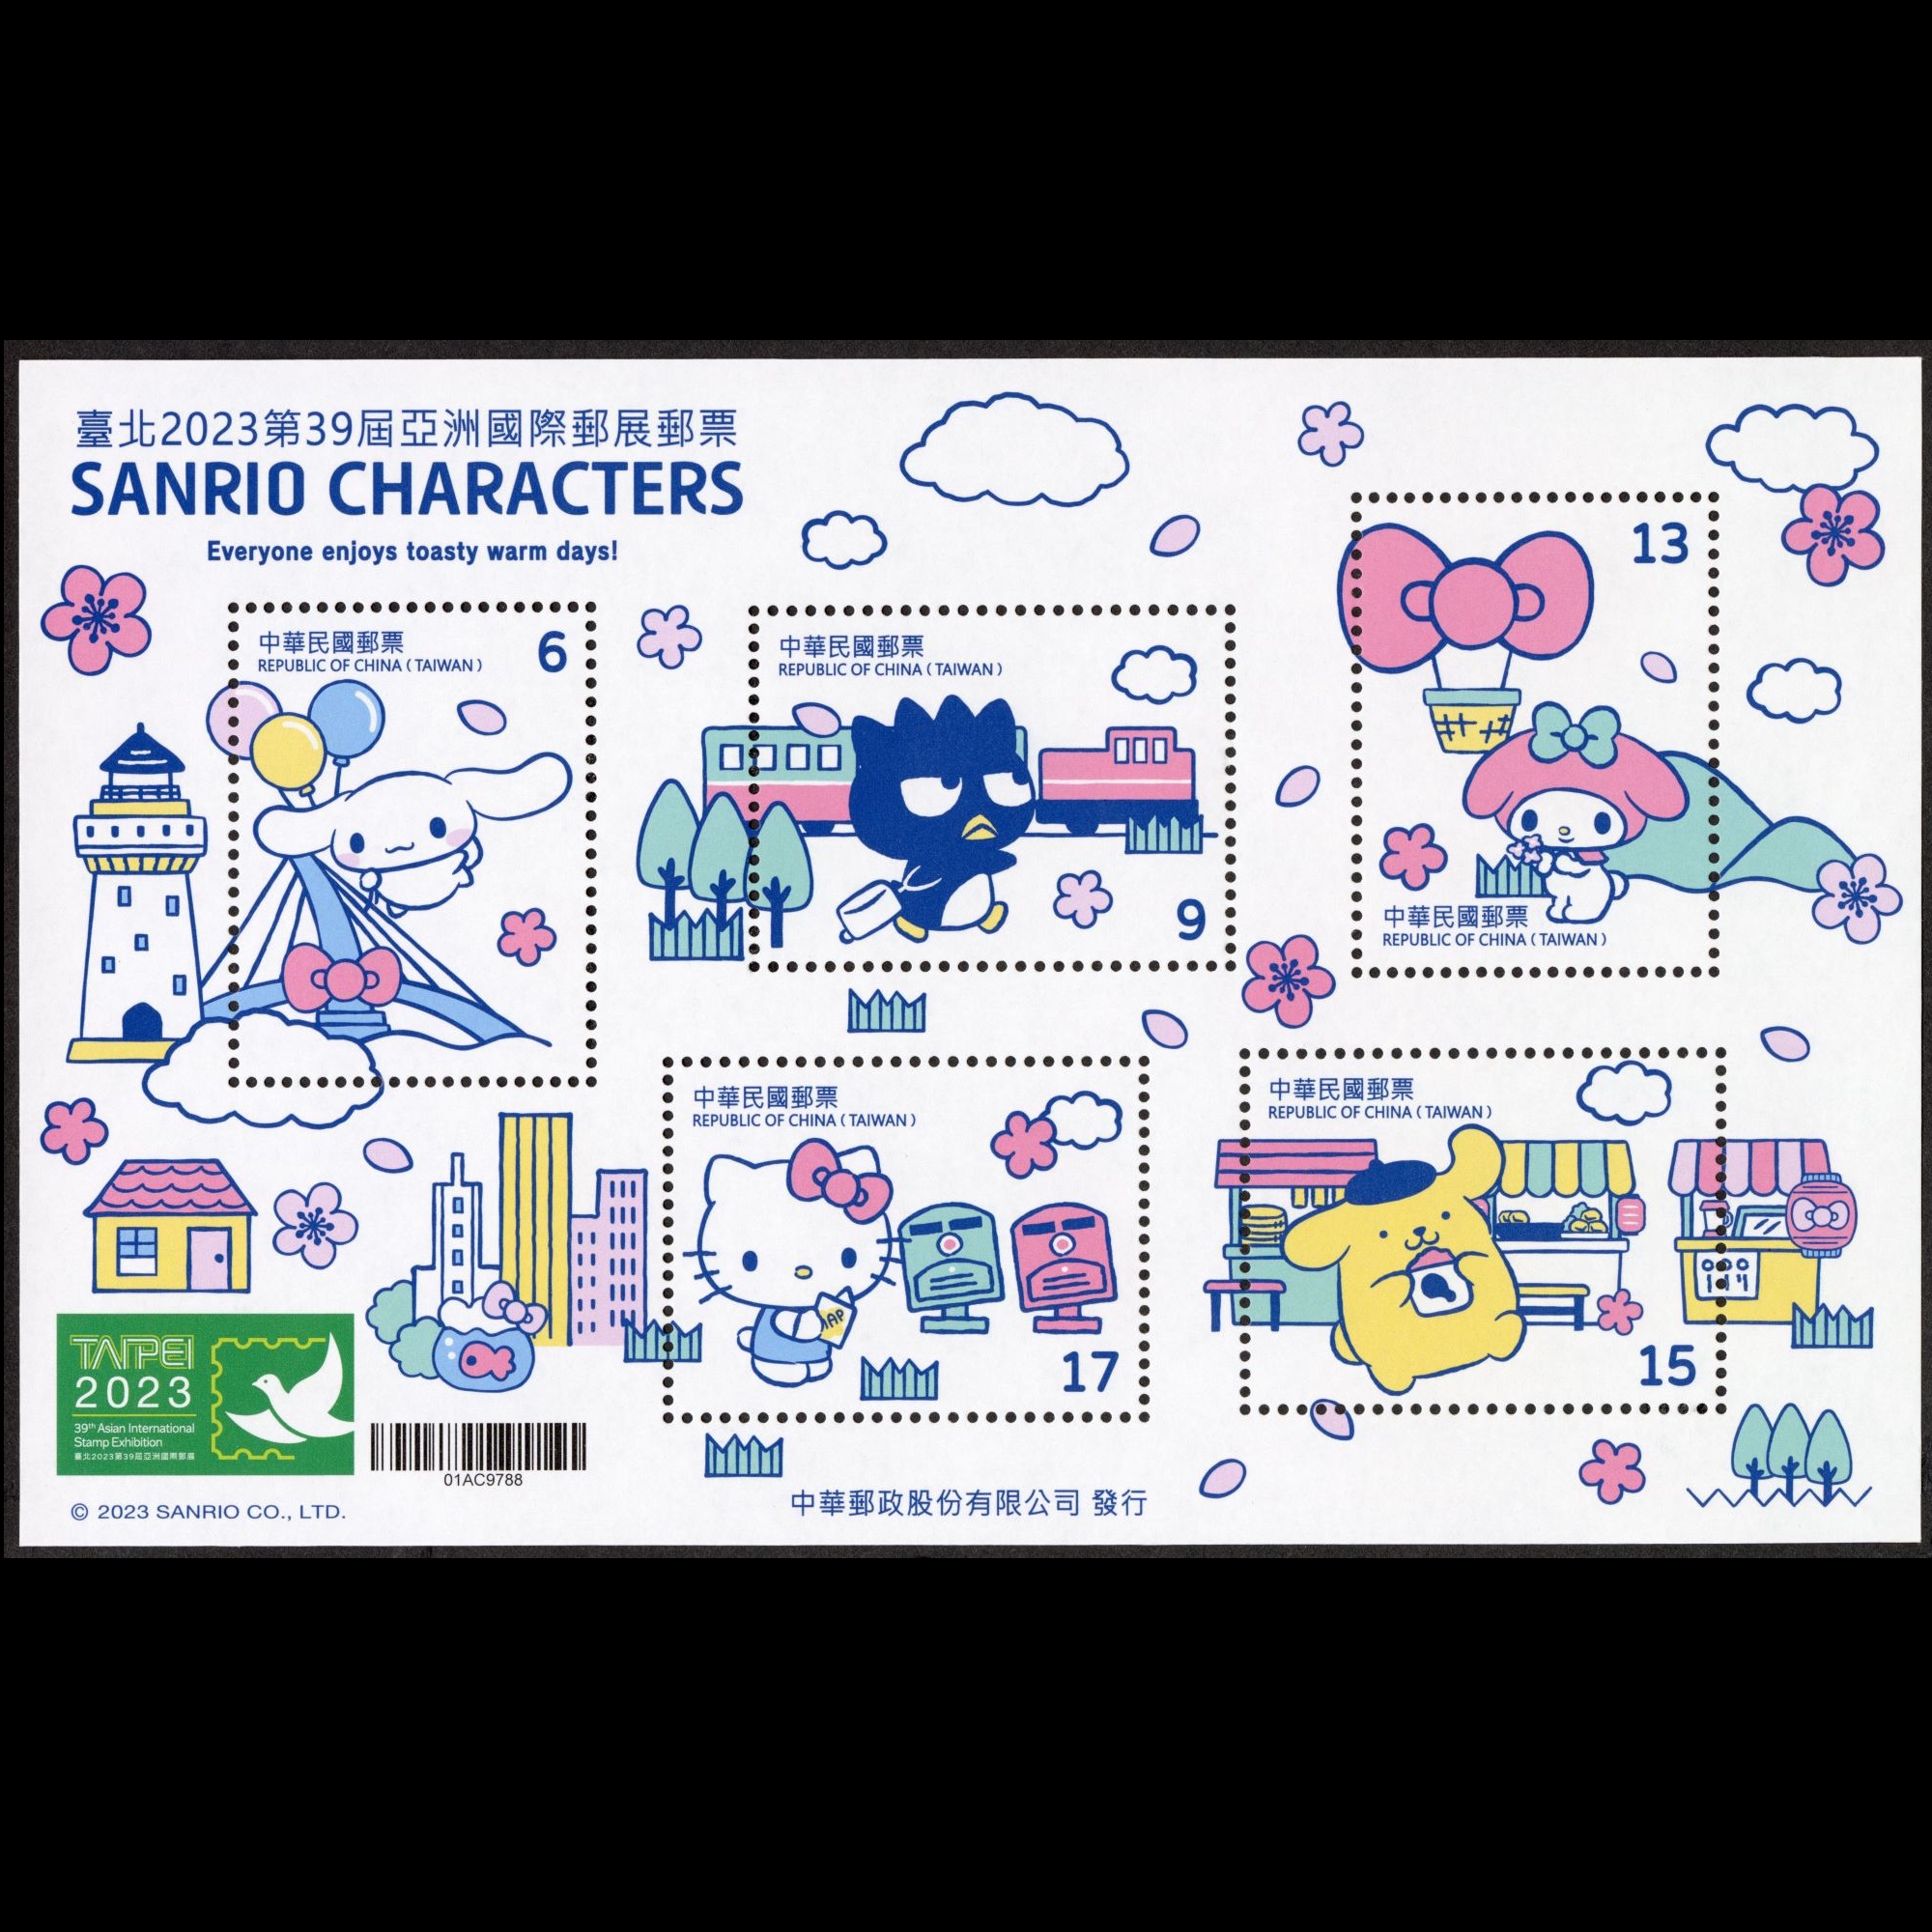 (Sp.739.2)Sp.739 TAIPEI 2023 – 39th Asian International Stamp Exhibition Souvenir Sheets: SANRIO CHARACTERS